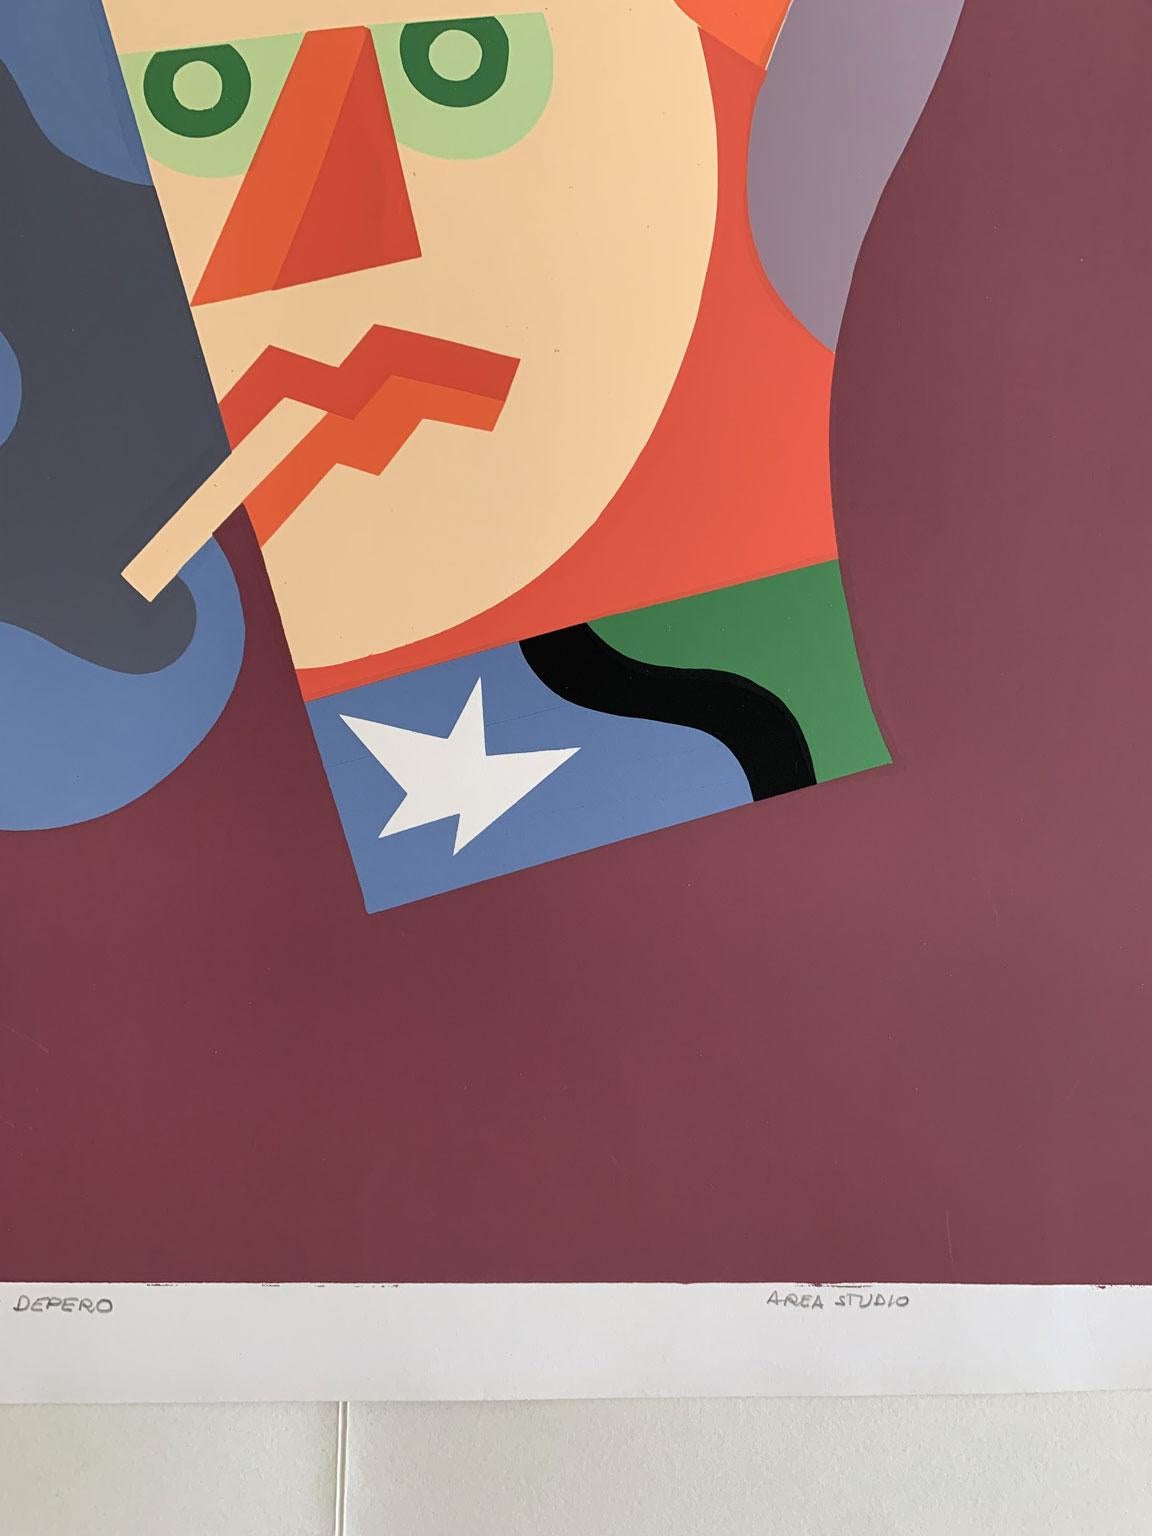 Italy 1974 Post -Modern Depero Multi-Color Print on Paper Numbered Edition 9